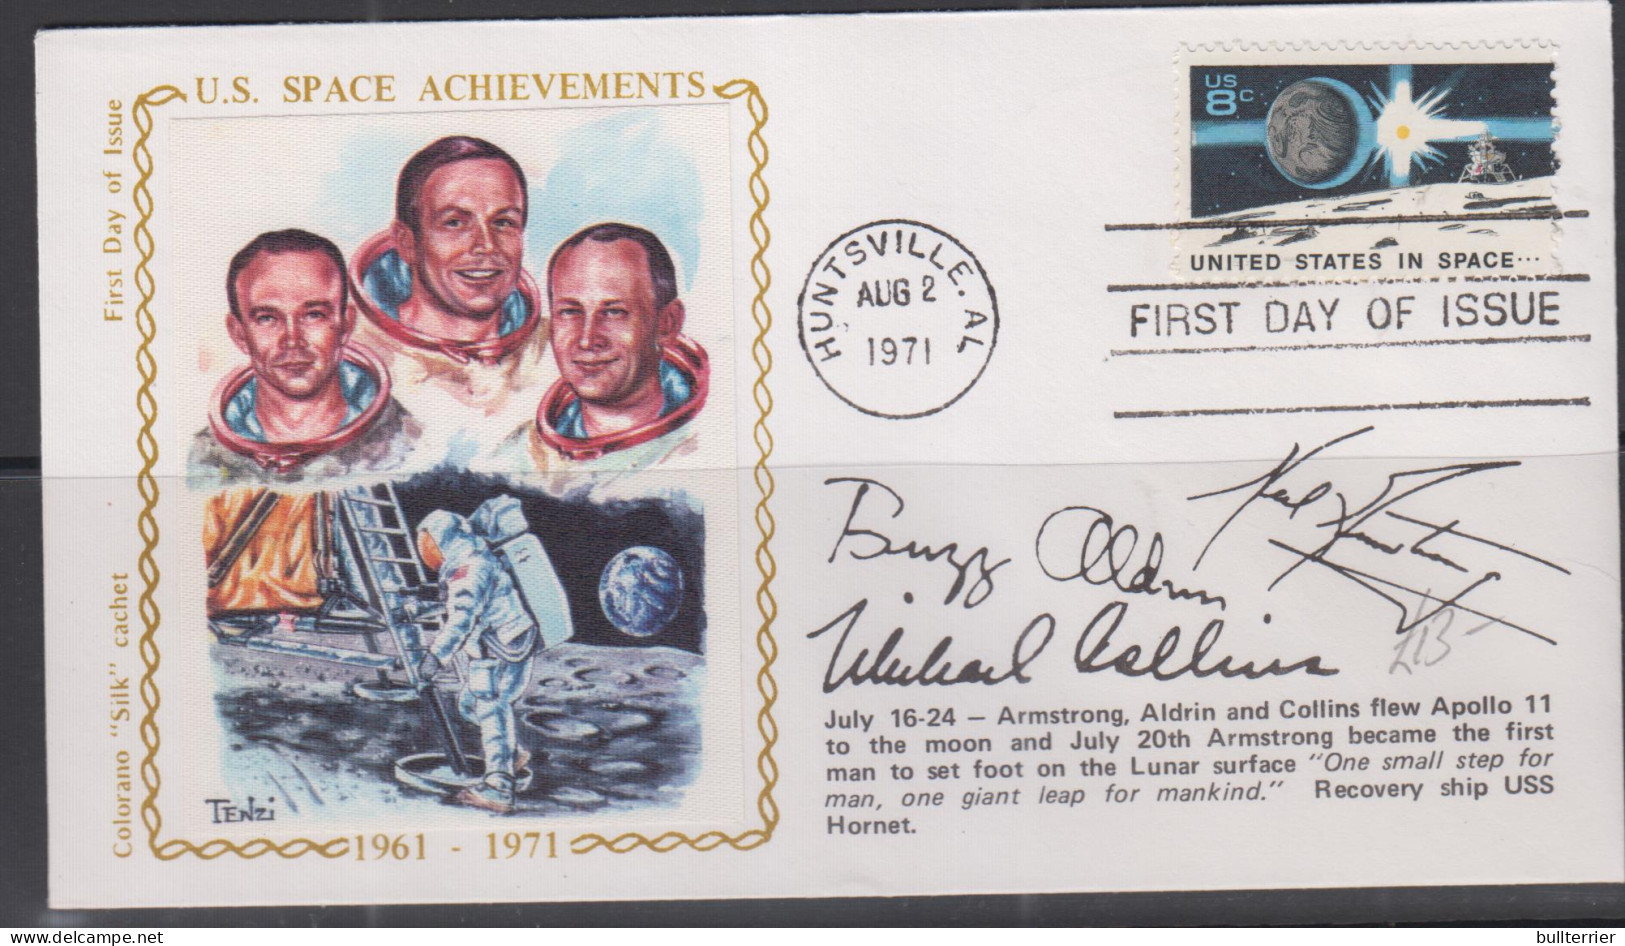 USA - 1979 - MOON LANDING SILK FIRST DAY COVER WITH AUTOPEN SIGNATURES ARMSTRONG, ALDRIN & COLLINS - Etats-Unis